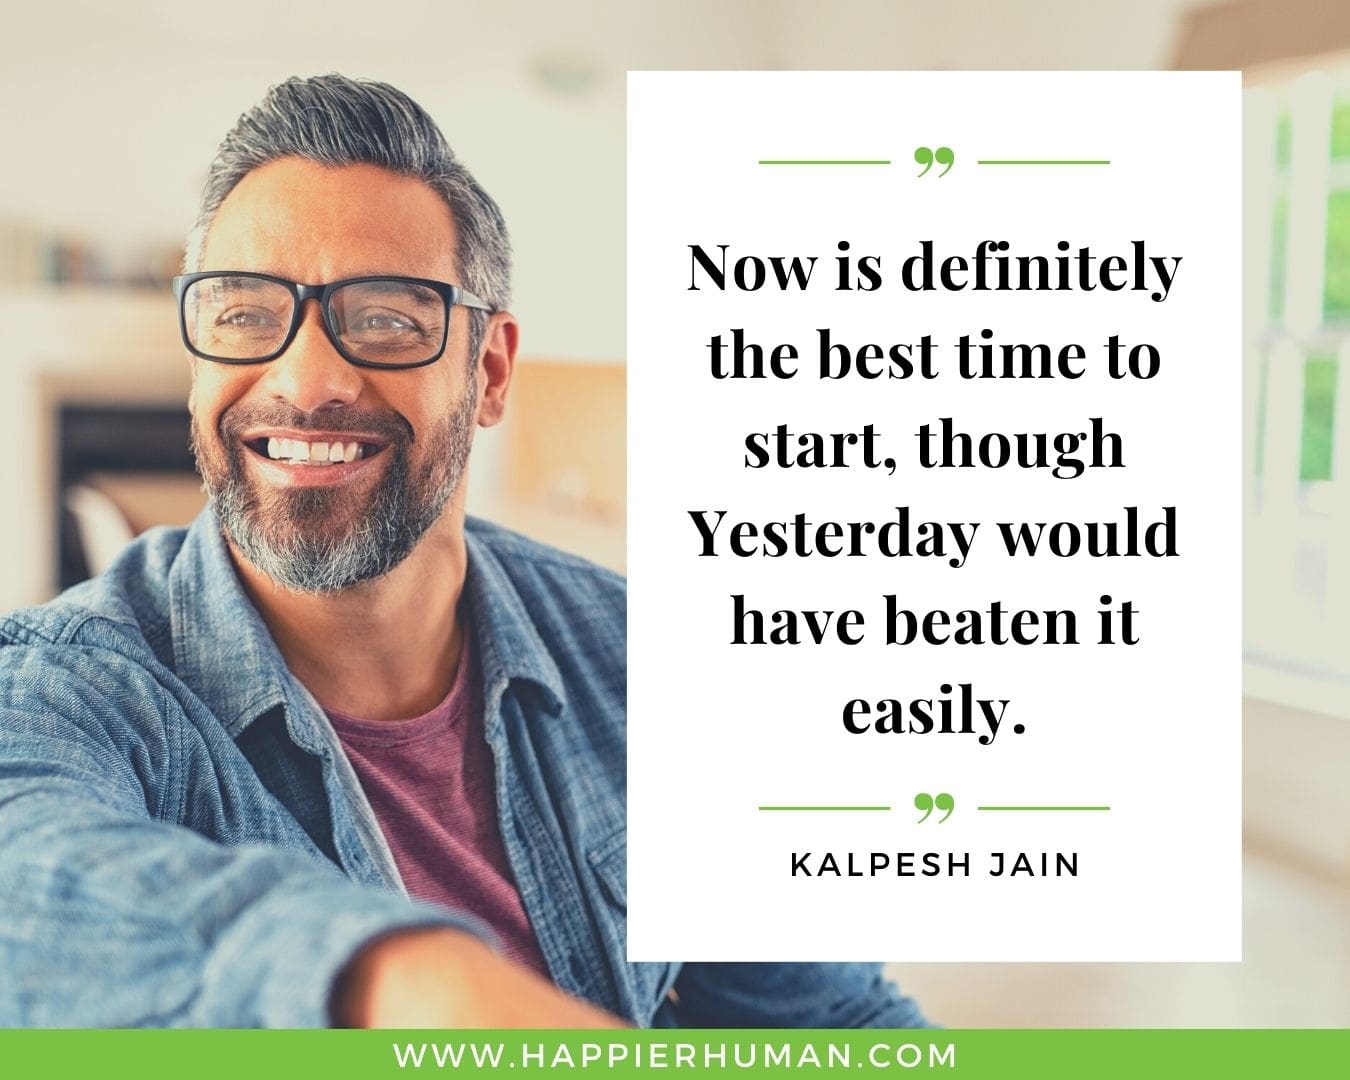 Overthinking Quotes - “Now is definitely the best time to start, though Yesterday would have beaten it easily.” - Kalpesh Jain